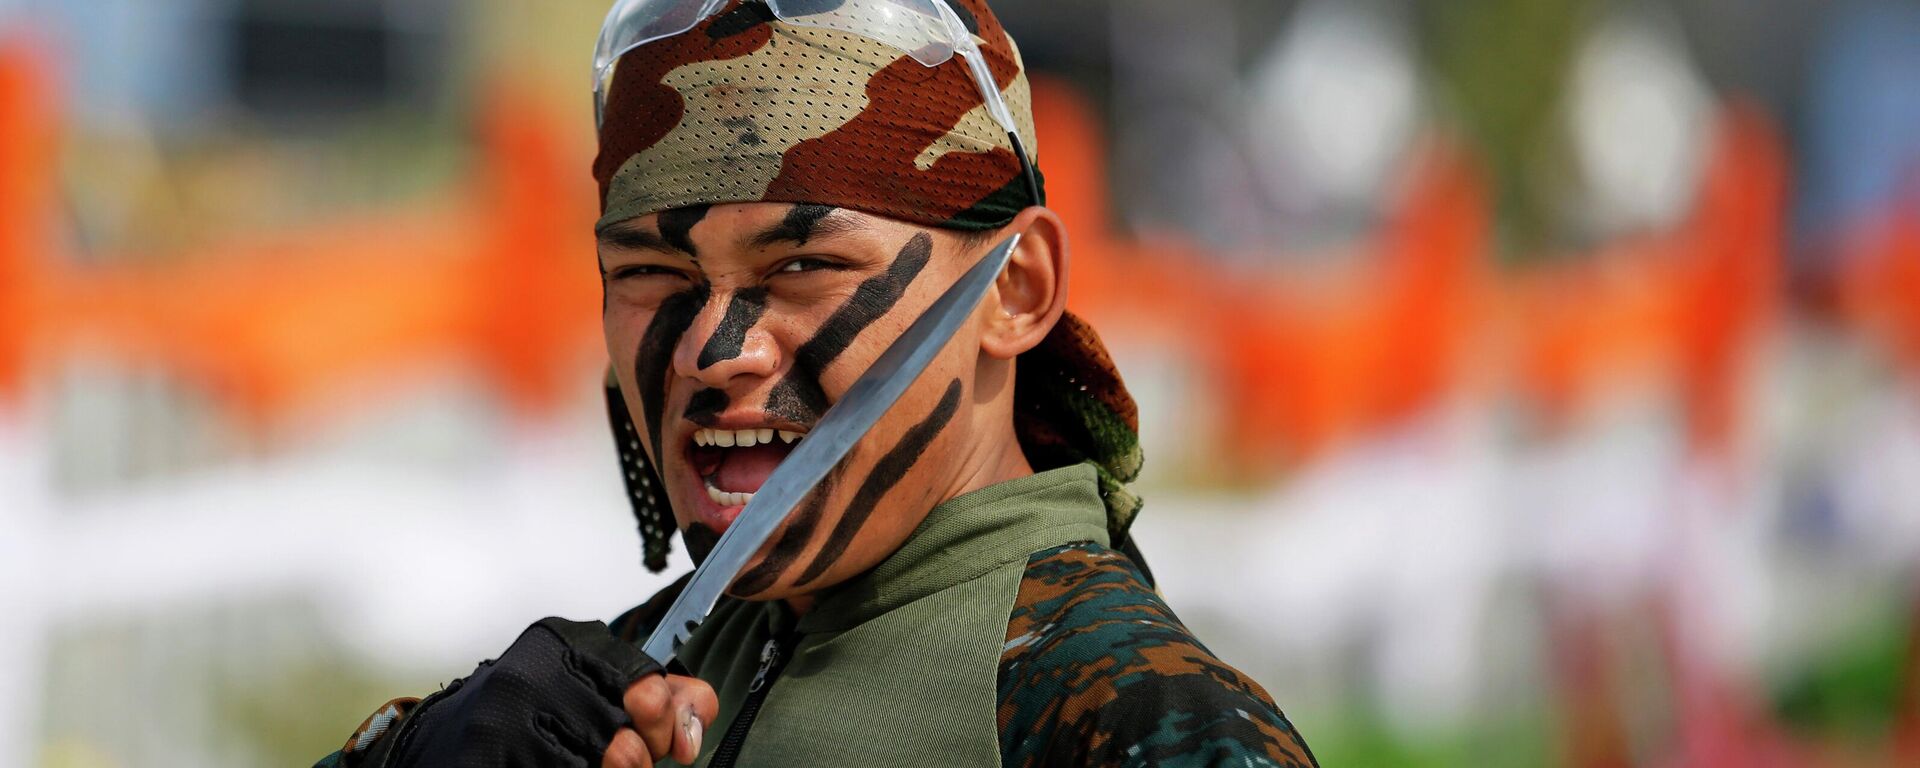 An Indian army soldier of the Gorkha regiment displays skills in the sidelines of the biennial defense exhibition in Lucknow, India, Sunday, Feb. 9, 2020 - Sputnik India, 1920, 29.10.2023